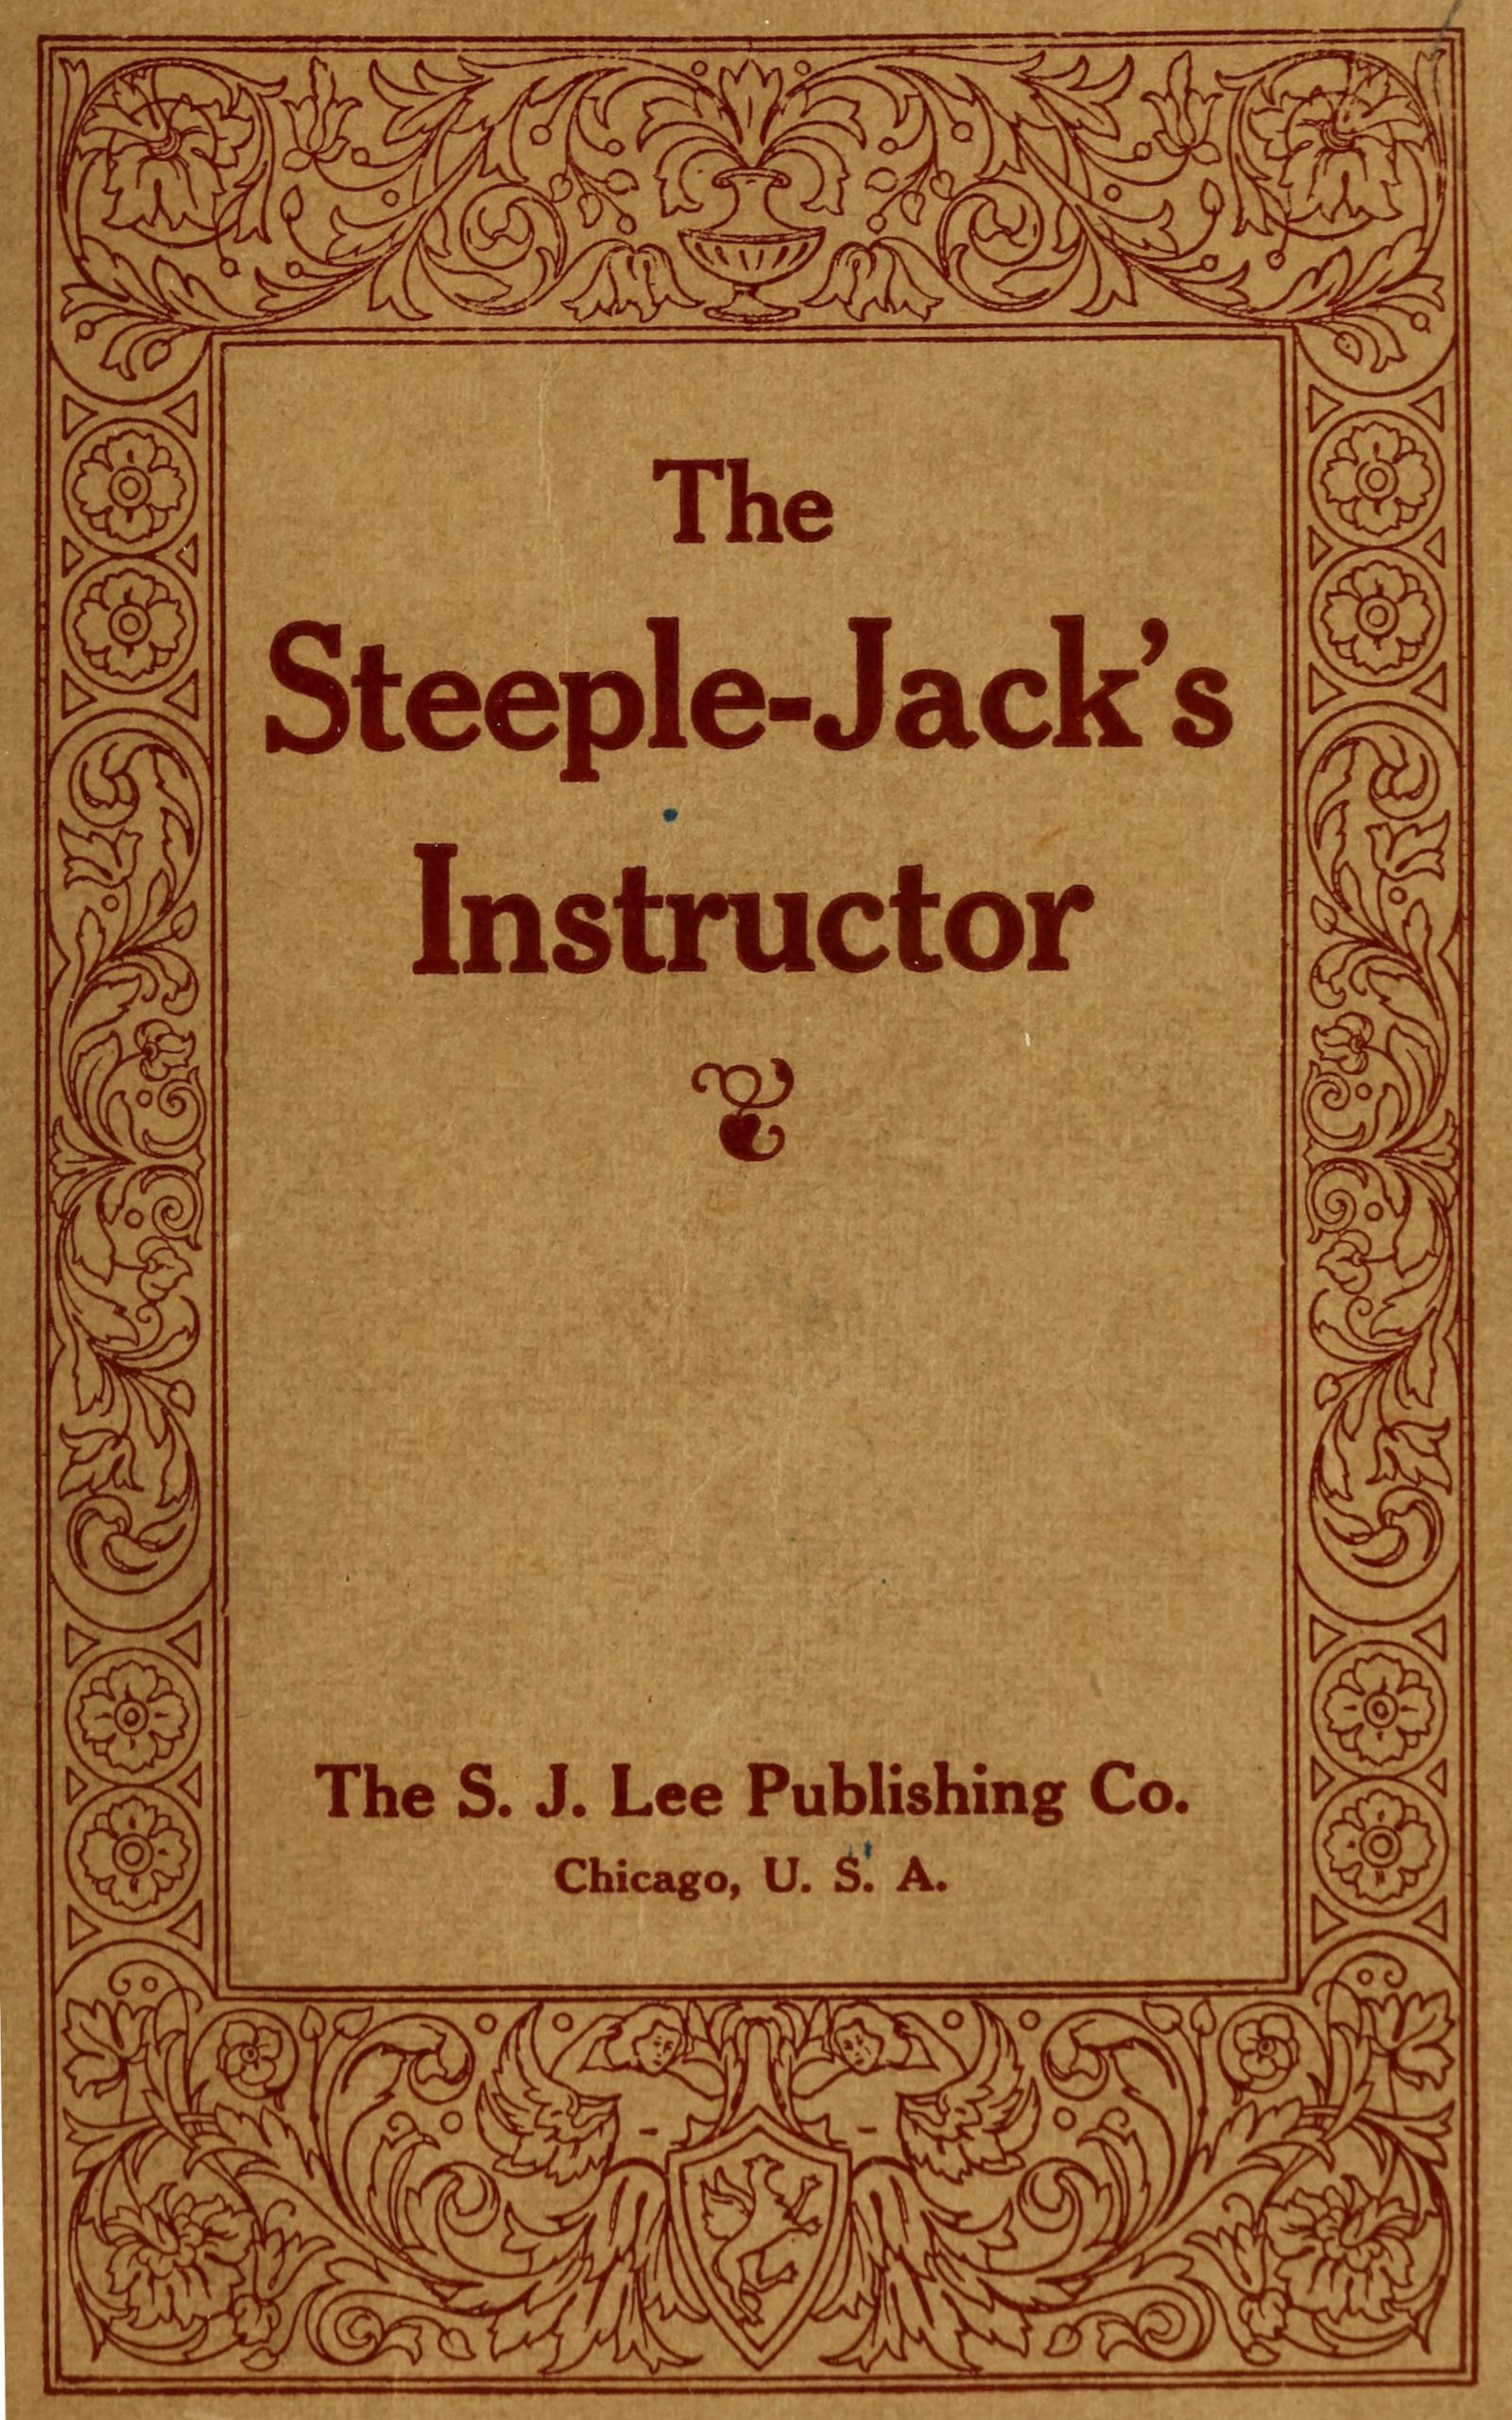 The steeple-jack's instructor